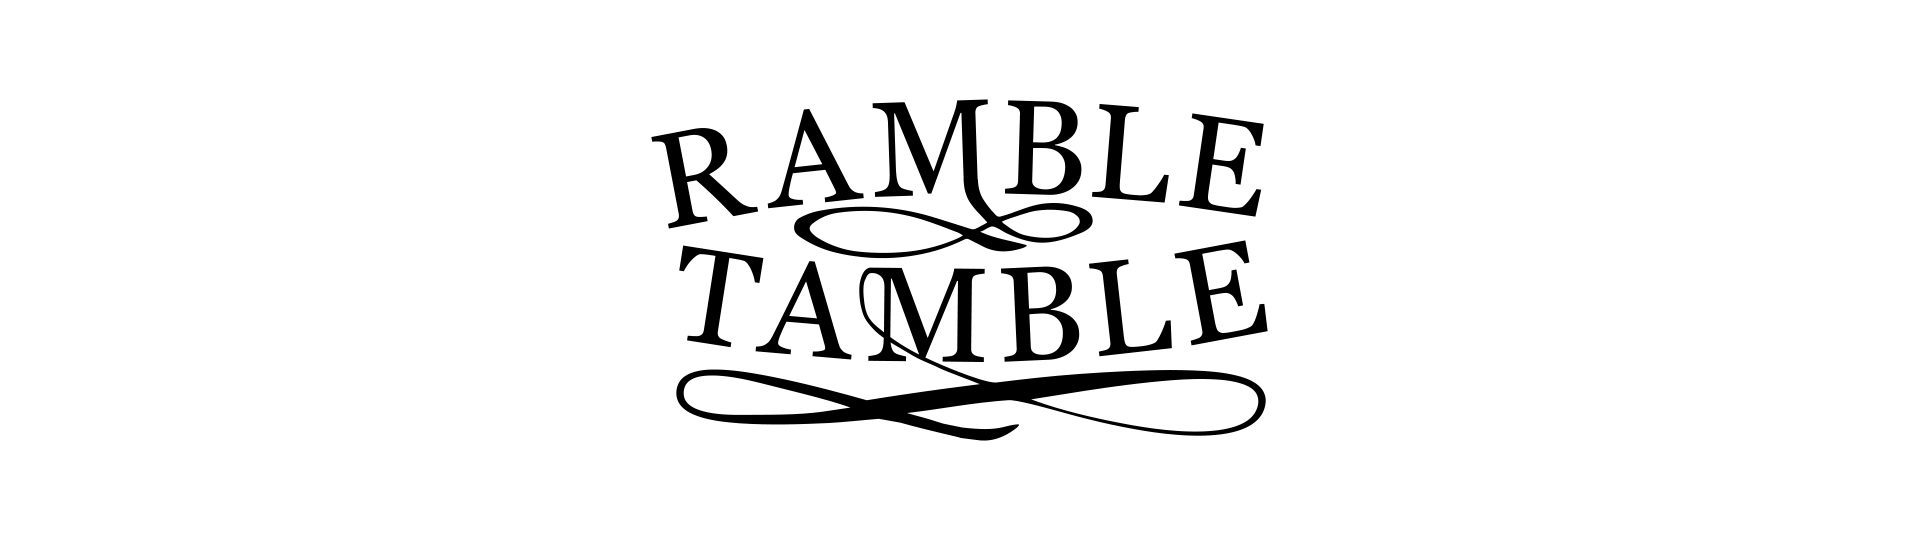 Ramble Tamble: The Creedence Clearwater Revival Experience